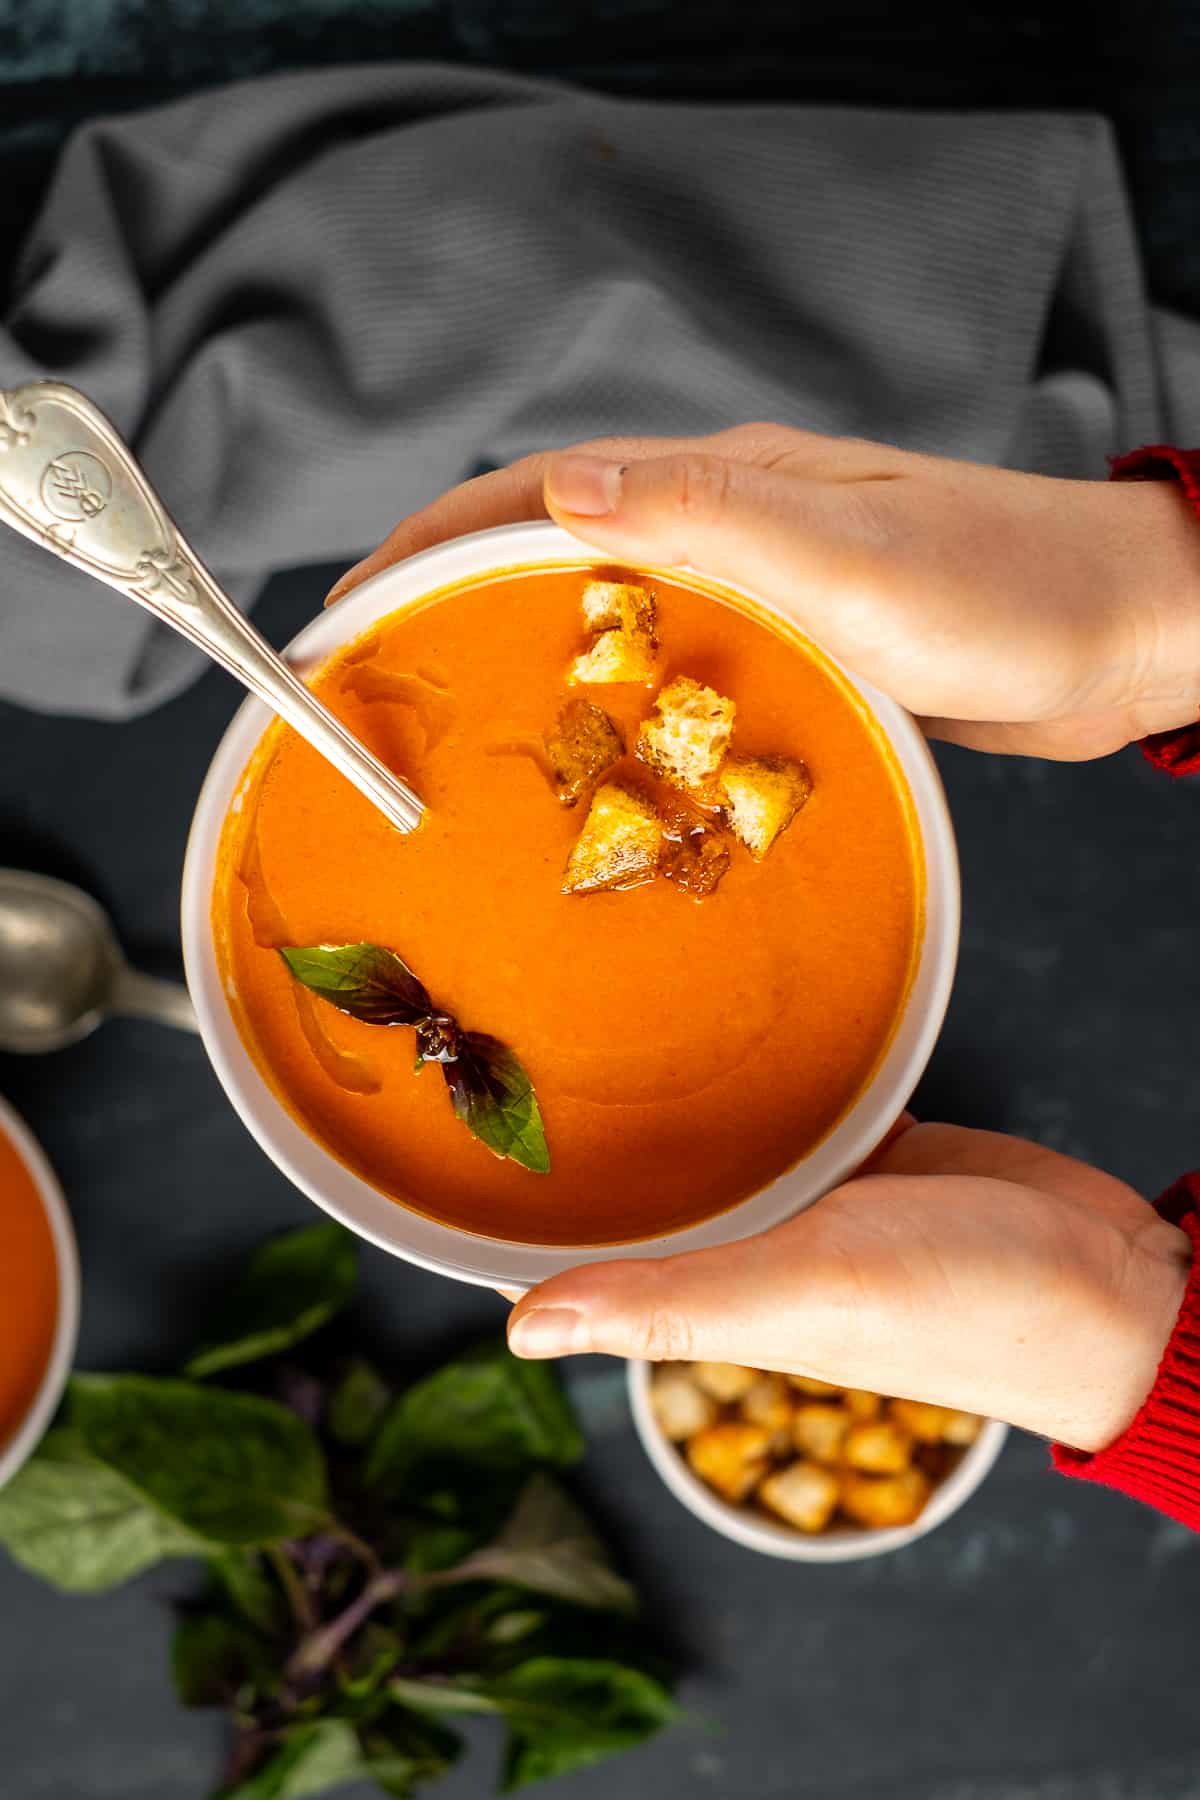 Hands holding a bowl of tomato soup garnished with croutons and fresh basil.